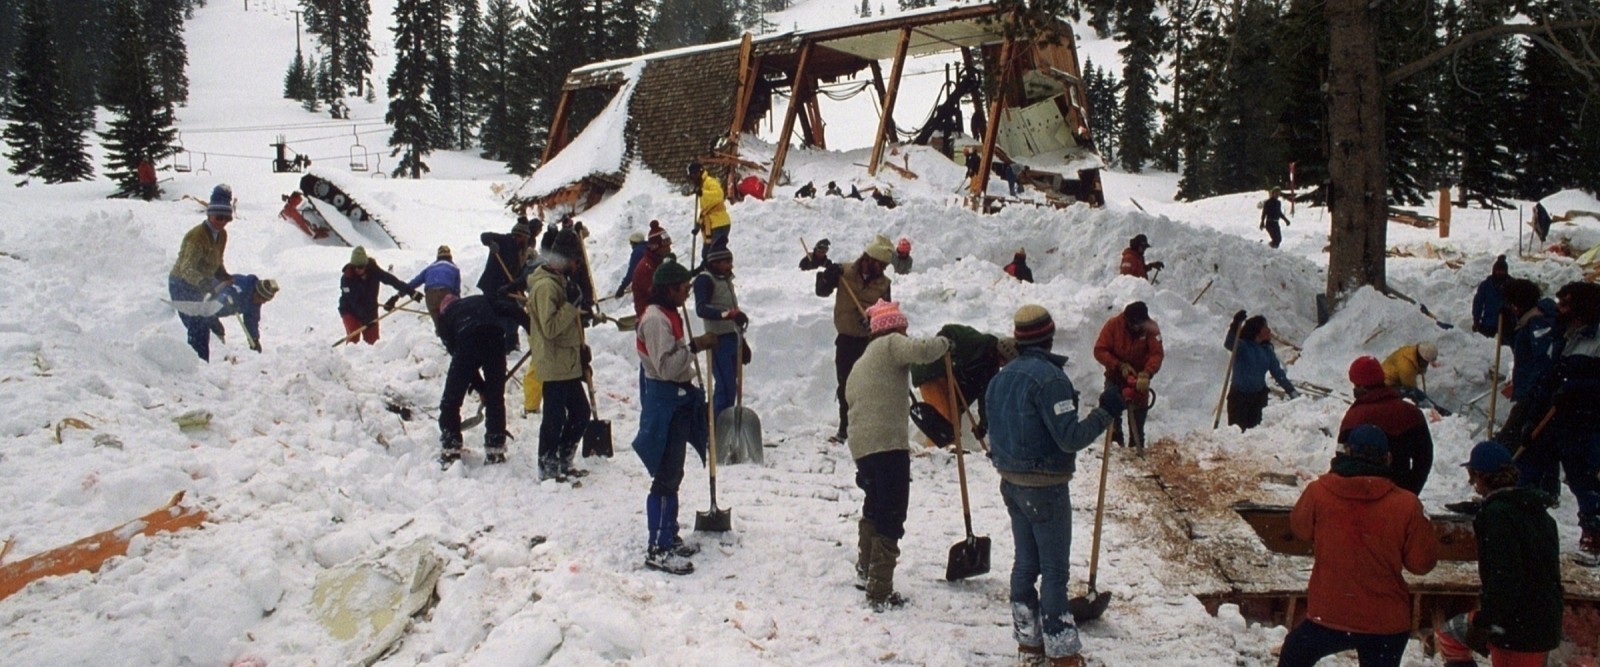 Buried: The 1982 Alpine Meadows Avalanche